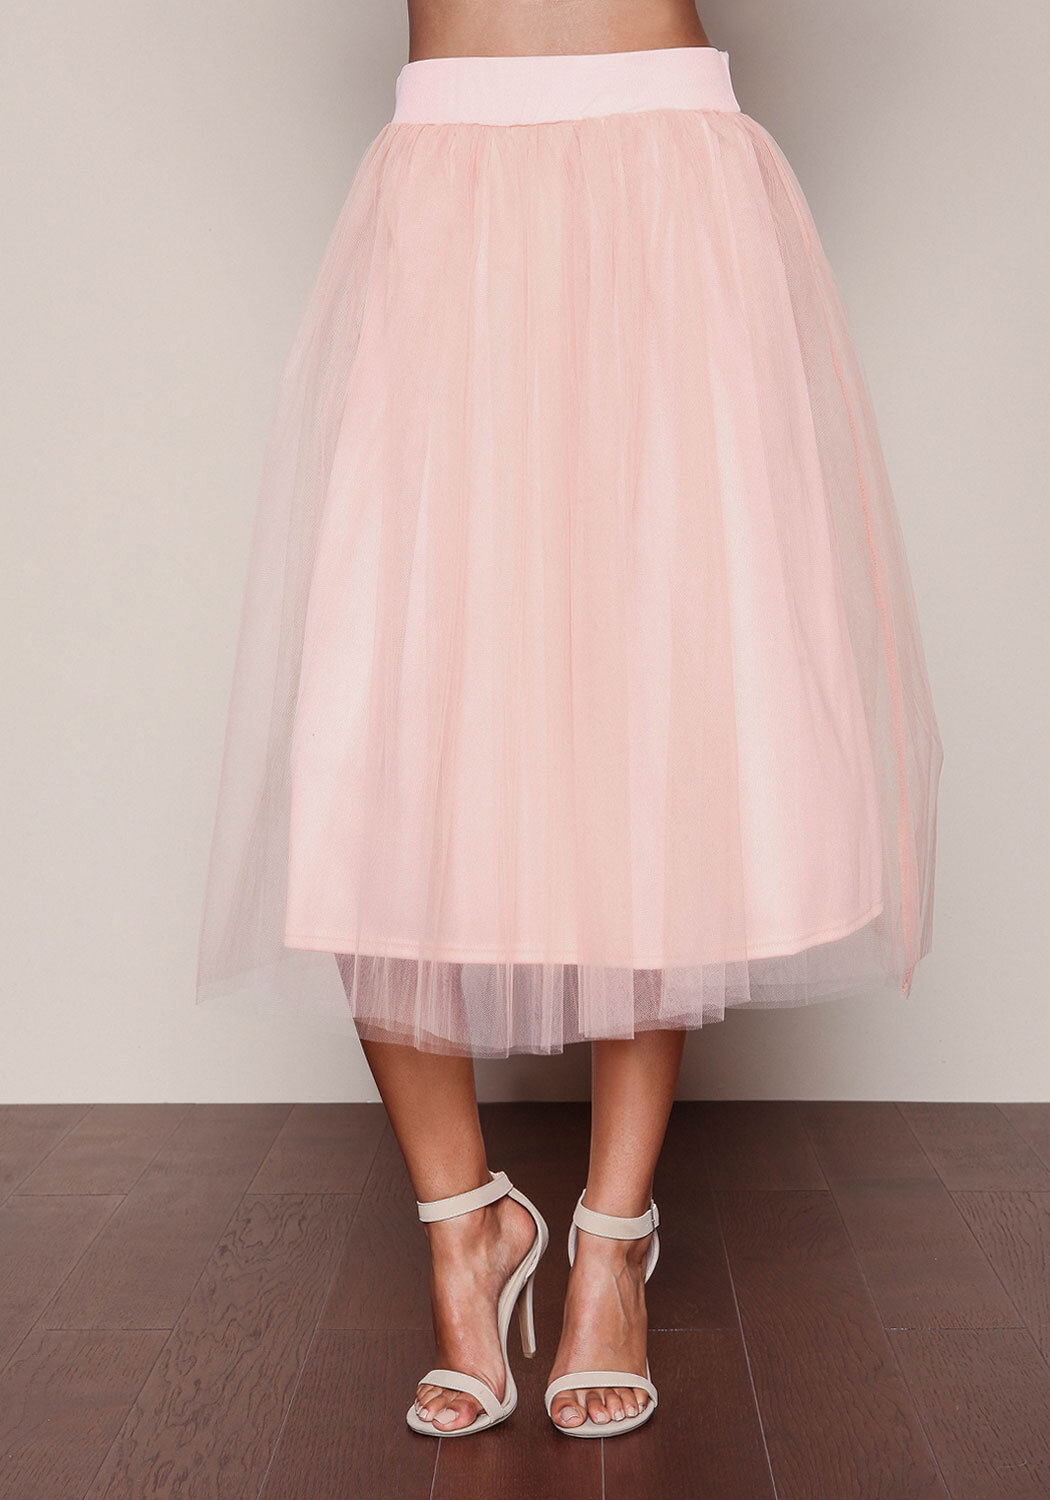 Junior Clothing | Pink Tulle Midi Skirt | Loveculture.com